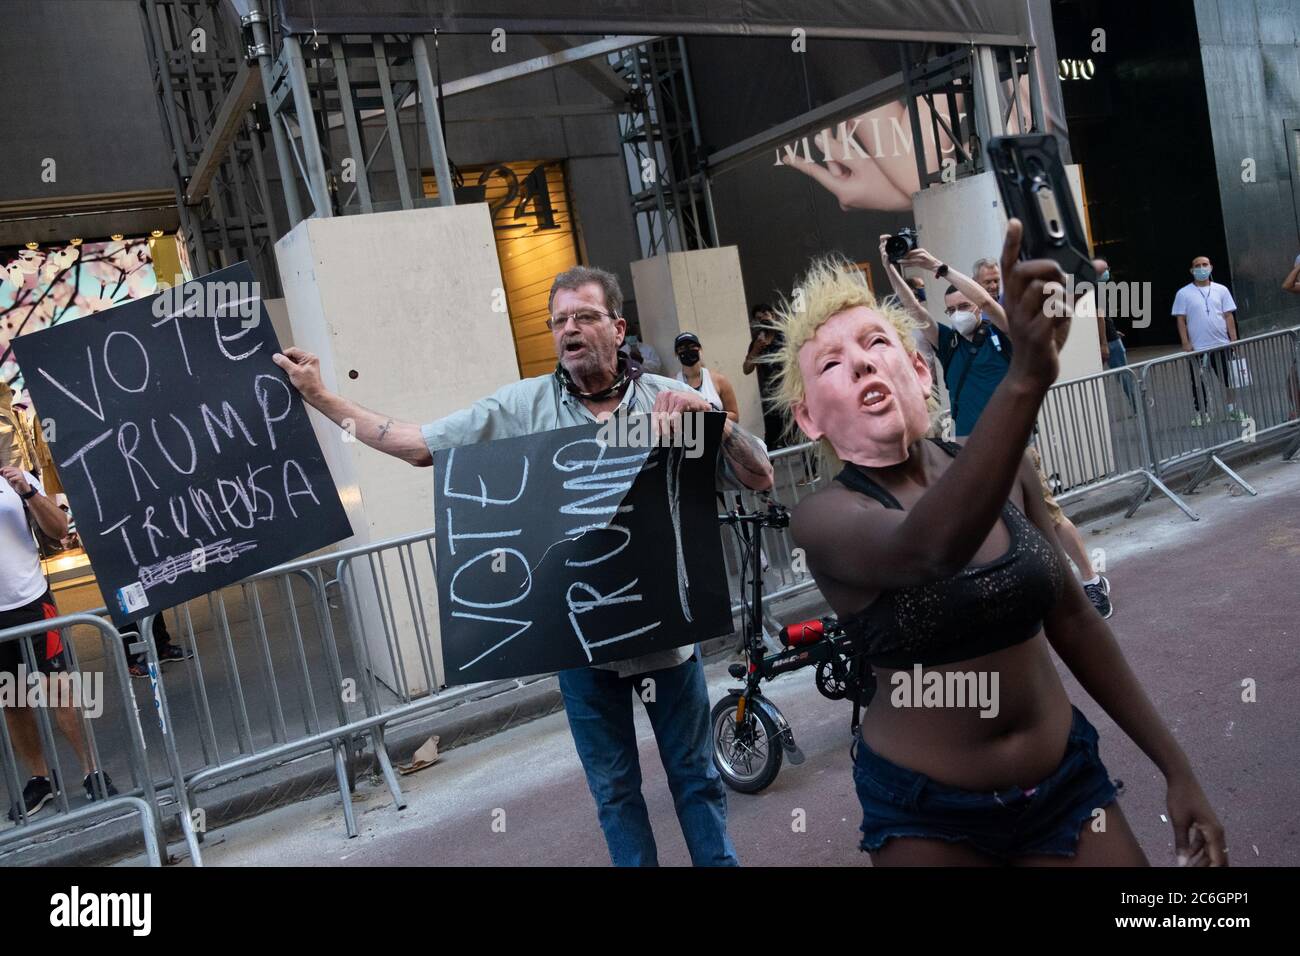 New York, United States. 08th July, 2020. A BLM protester takes a selfie in front of a Trump supporter outside the Trump Tower where a large Black Lives Matter mural was painted.As New York City enters phase 3 of reopening retail stores for indoor shopping, restaurants have been postponed for indoor dinning. Meanwhile Black Lives Matter protests continue in the city as the Mayor along with a group of people painted a large Black Lives Matter mural in front of Trump Tower on 5th Ave. Credit: SOPA Images Limited/Alamy Live News Stock Photo